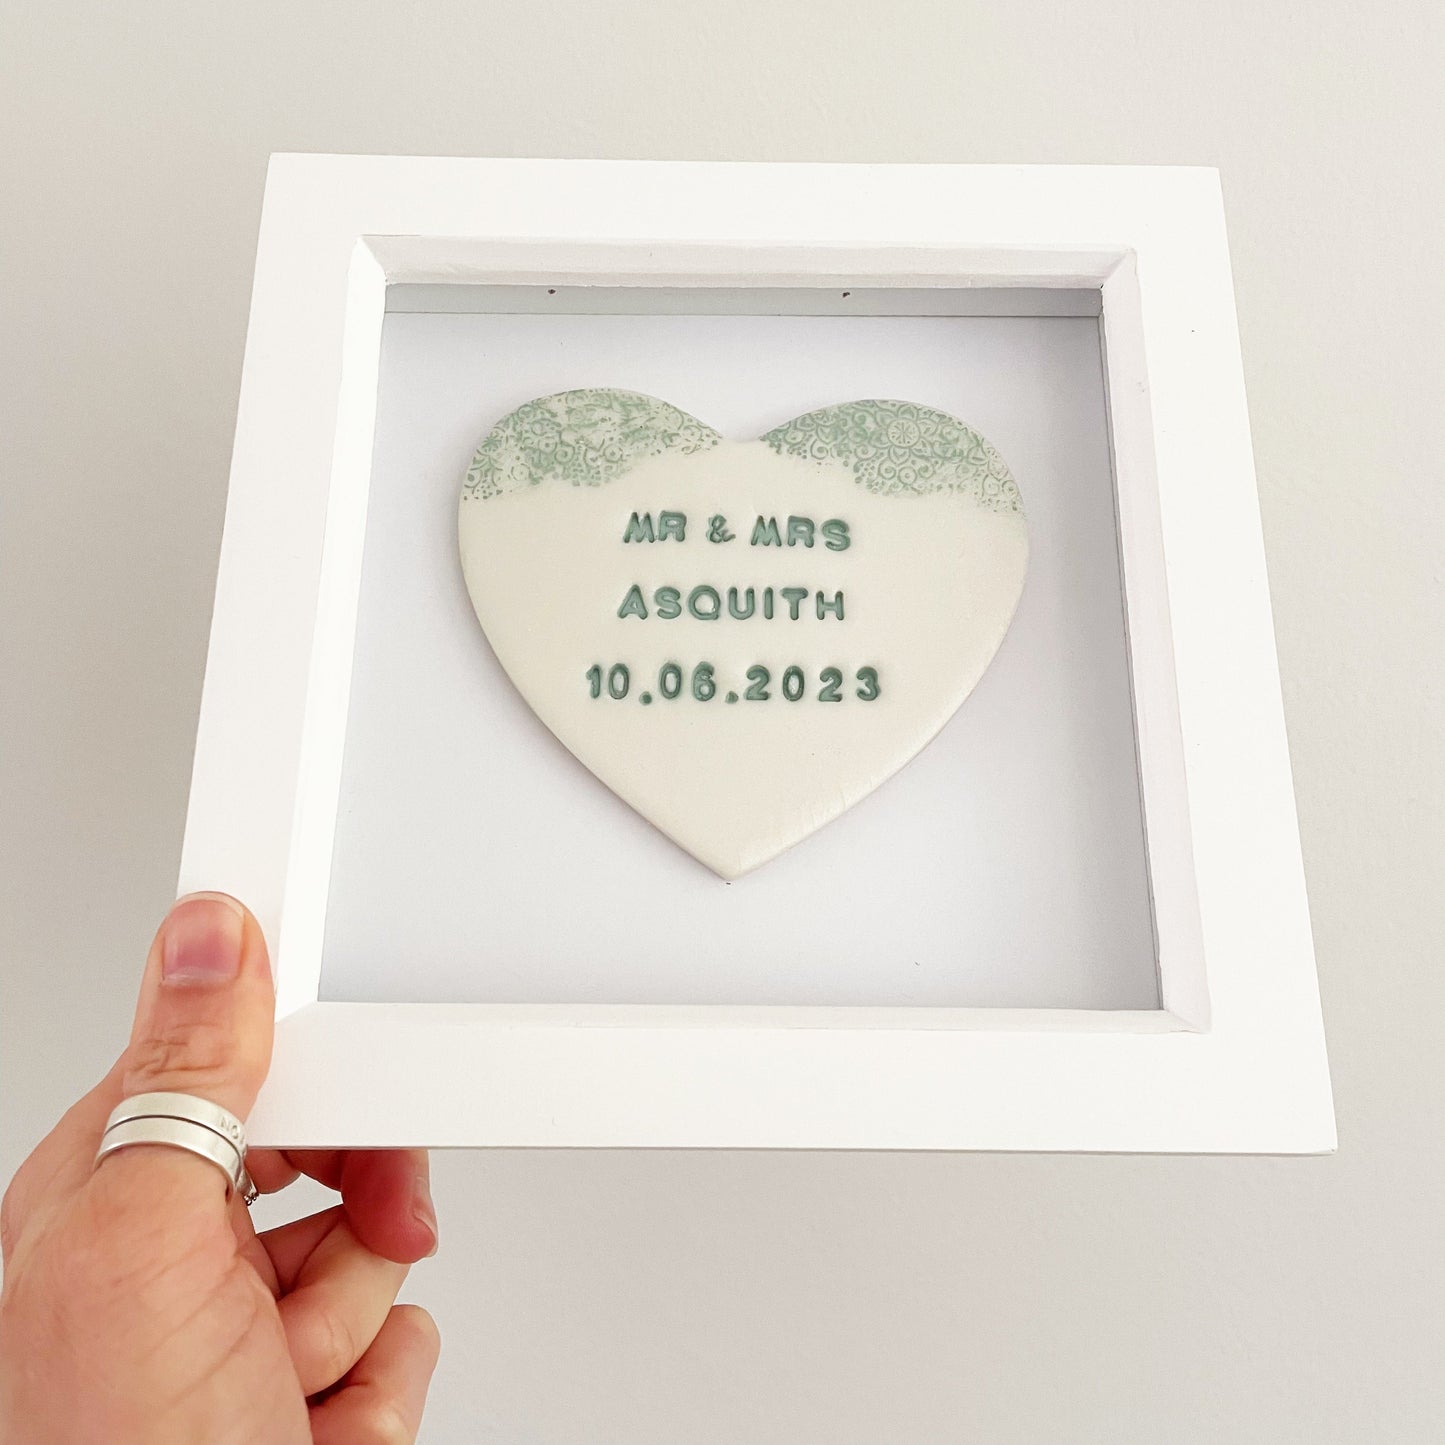 Personalised framed wedding heart gift, pearlised white clay heart with a sage green lace edge at the top of the heart in a white box frame, the heart is personalised with MR & MRS ASQUITH 10.06.2023